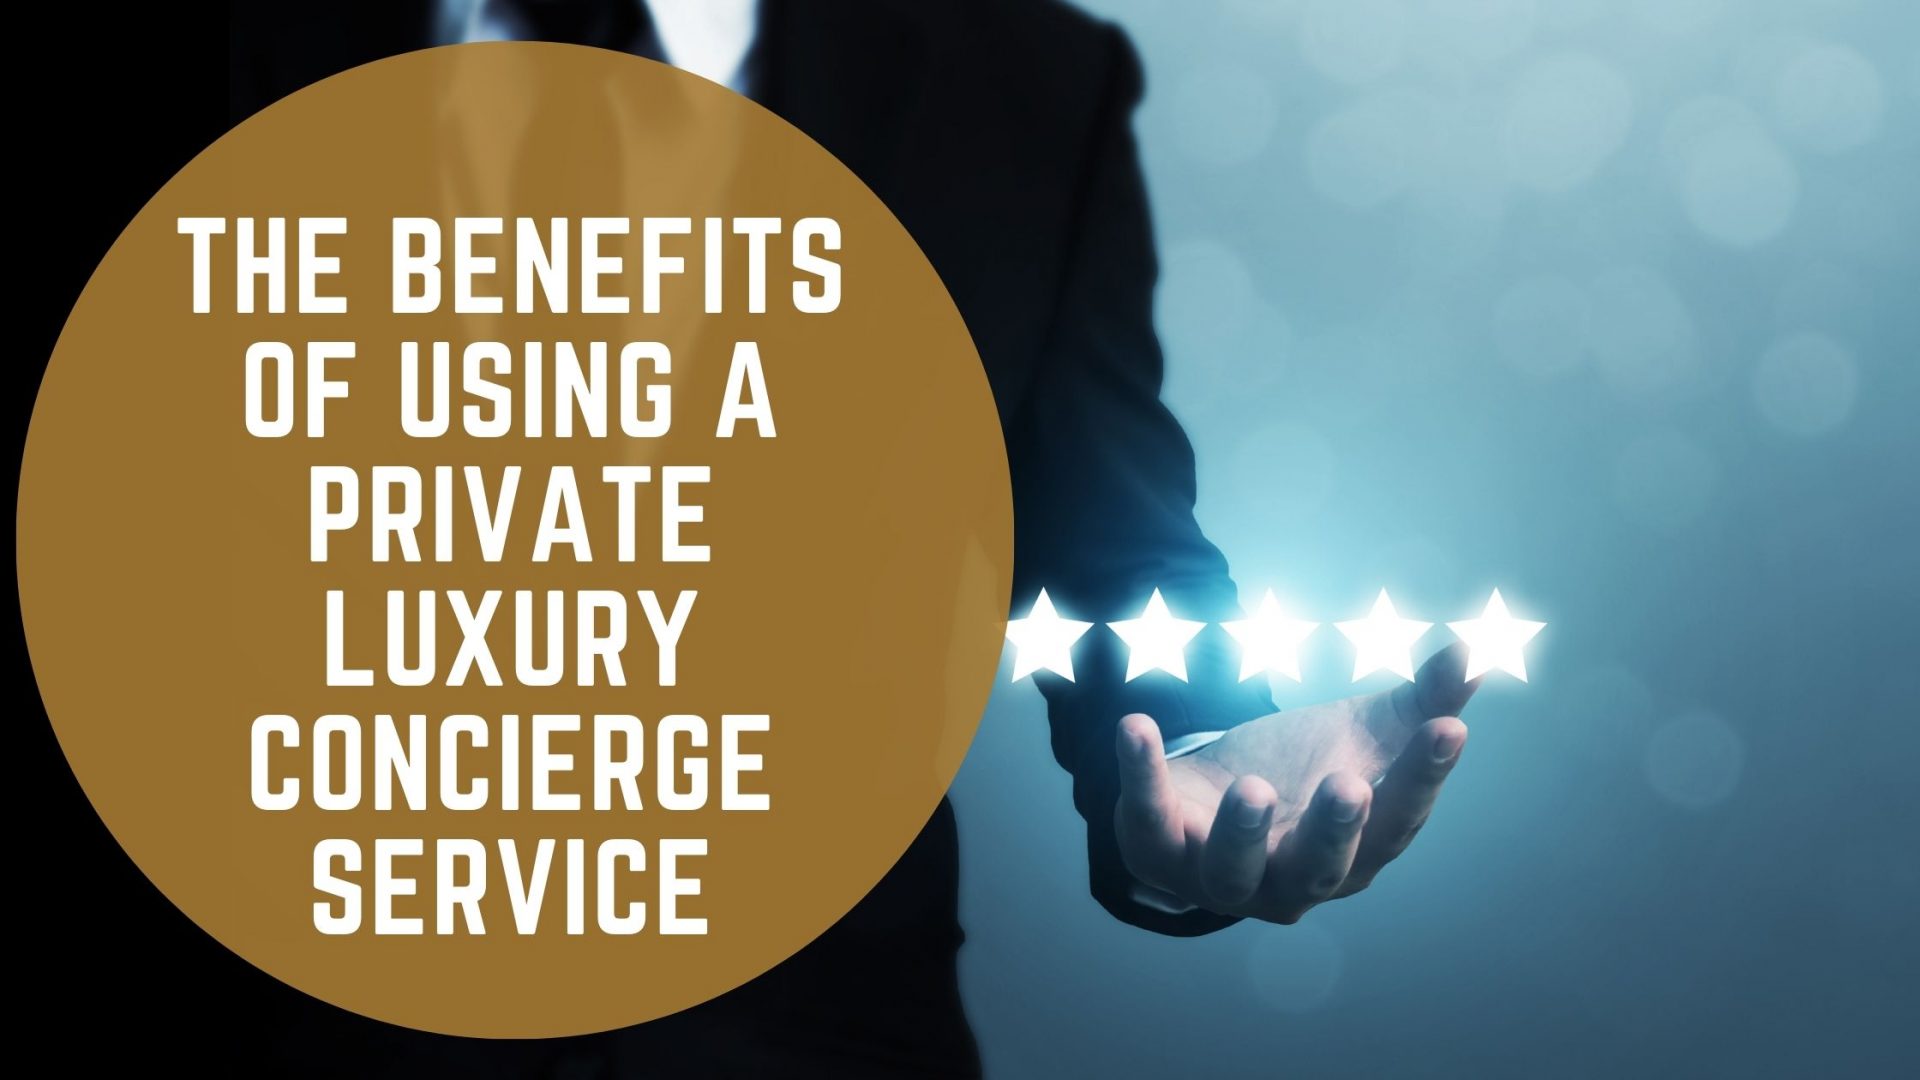 The Benefits Of Using A Private Luxury Concierge Service